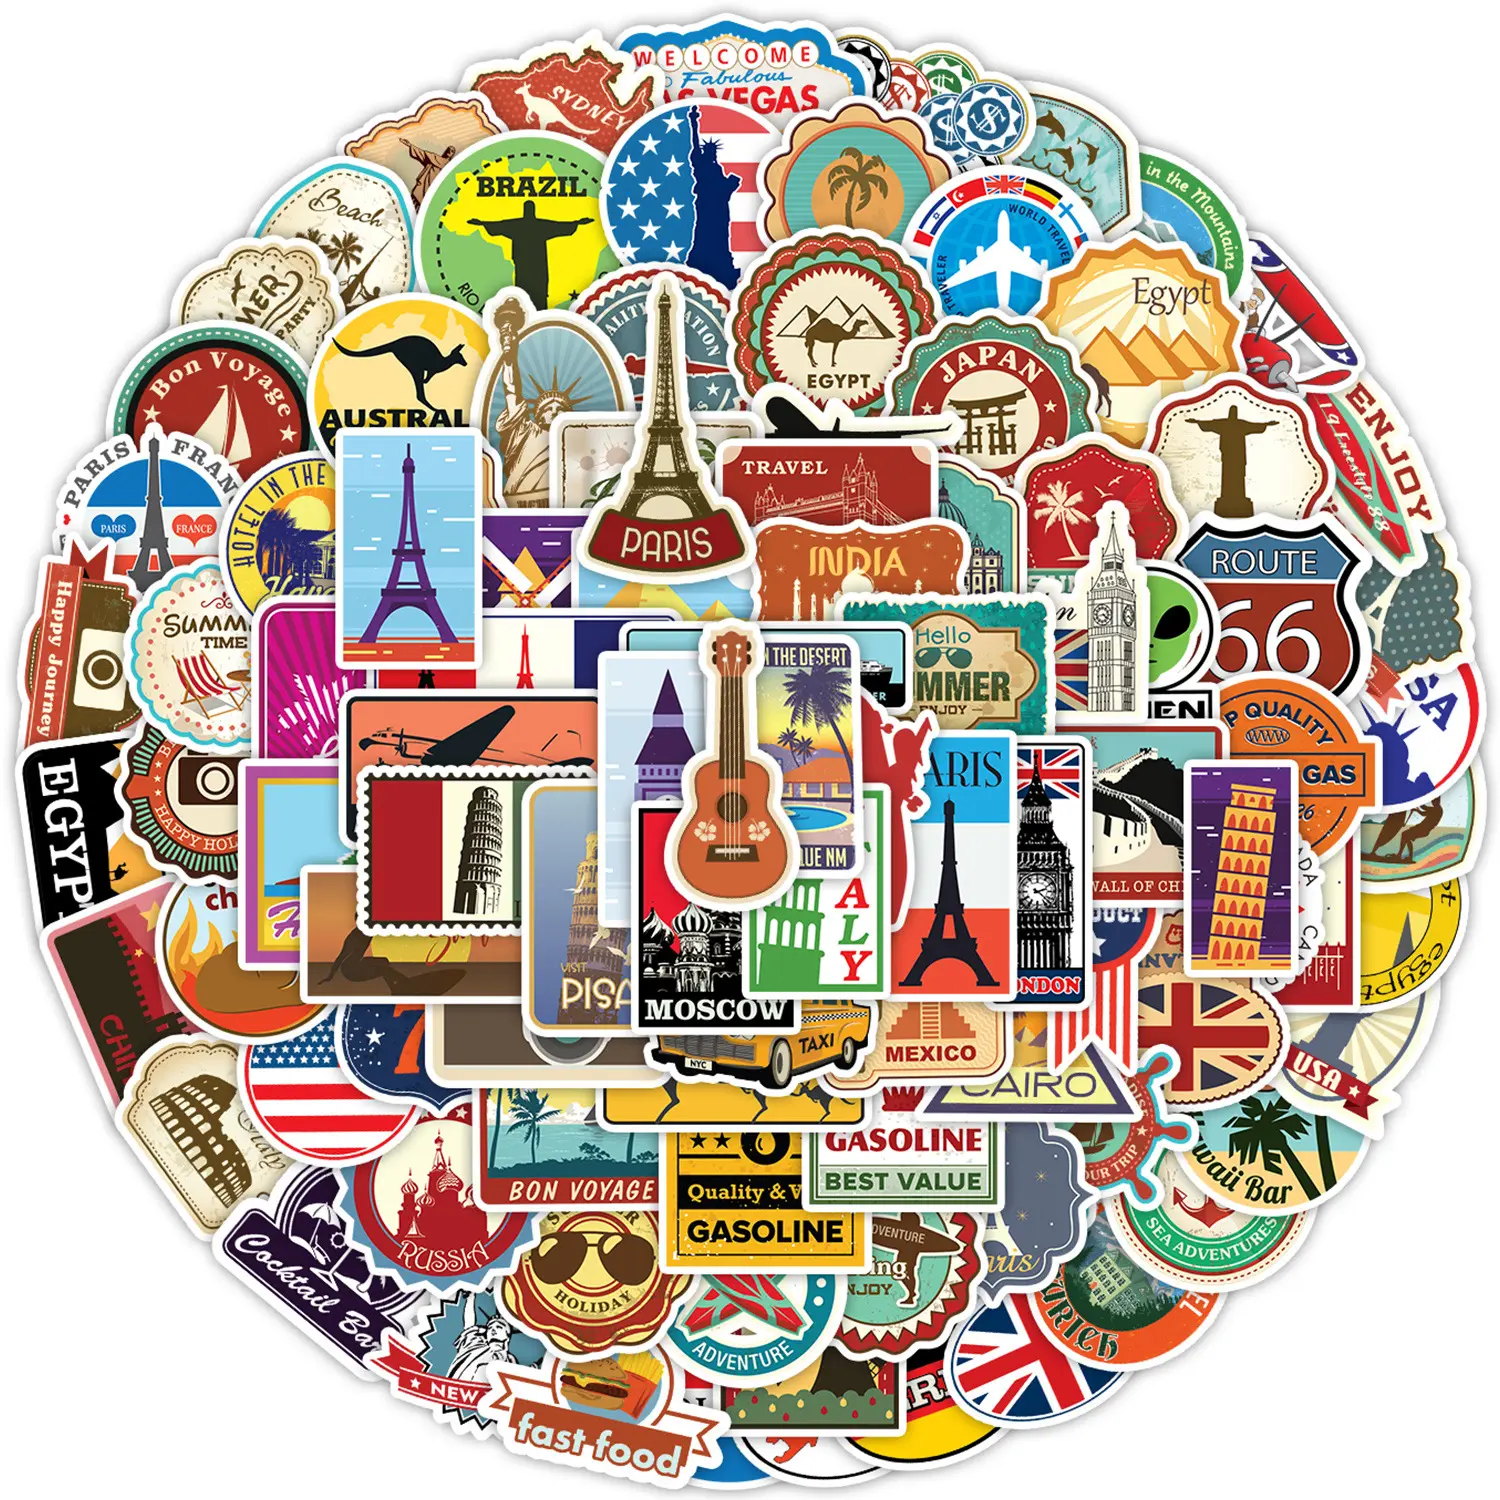 100Pcs New World Travel Landmark Graffiti Stickers For Luggage Notebook Waterproof Country Famous Building Sticker